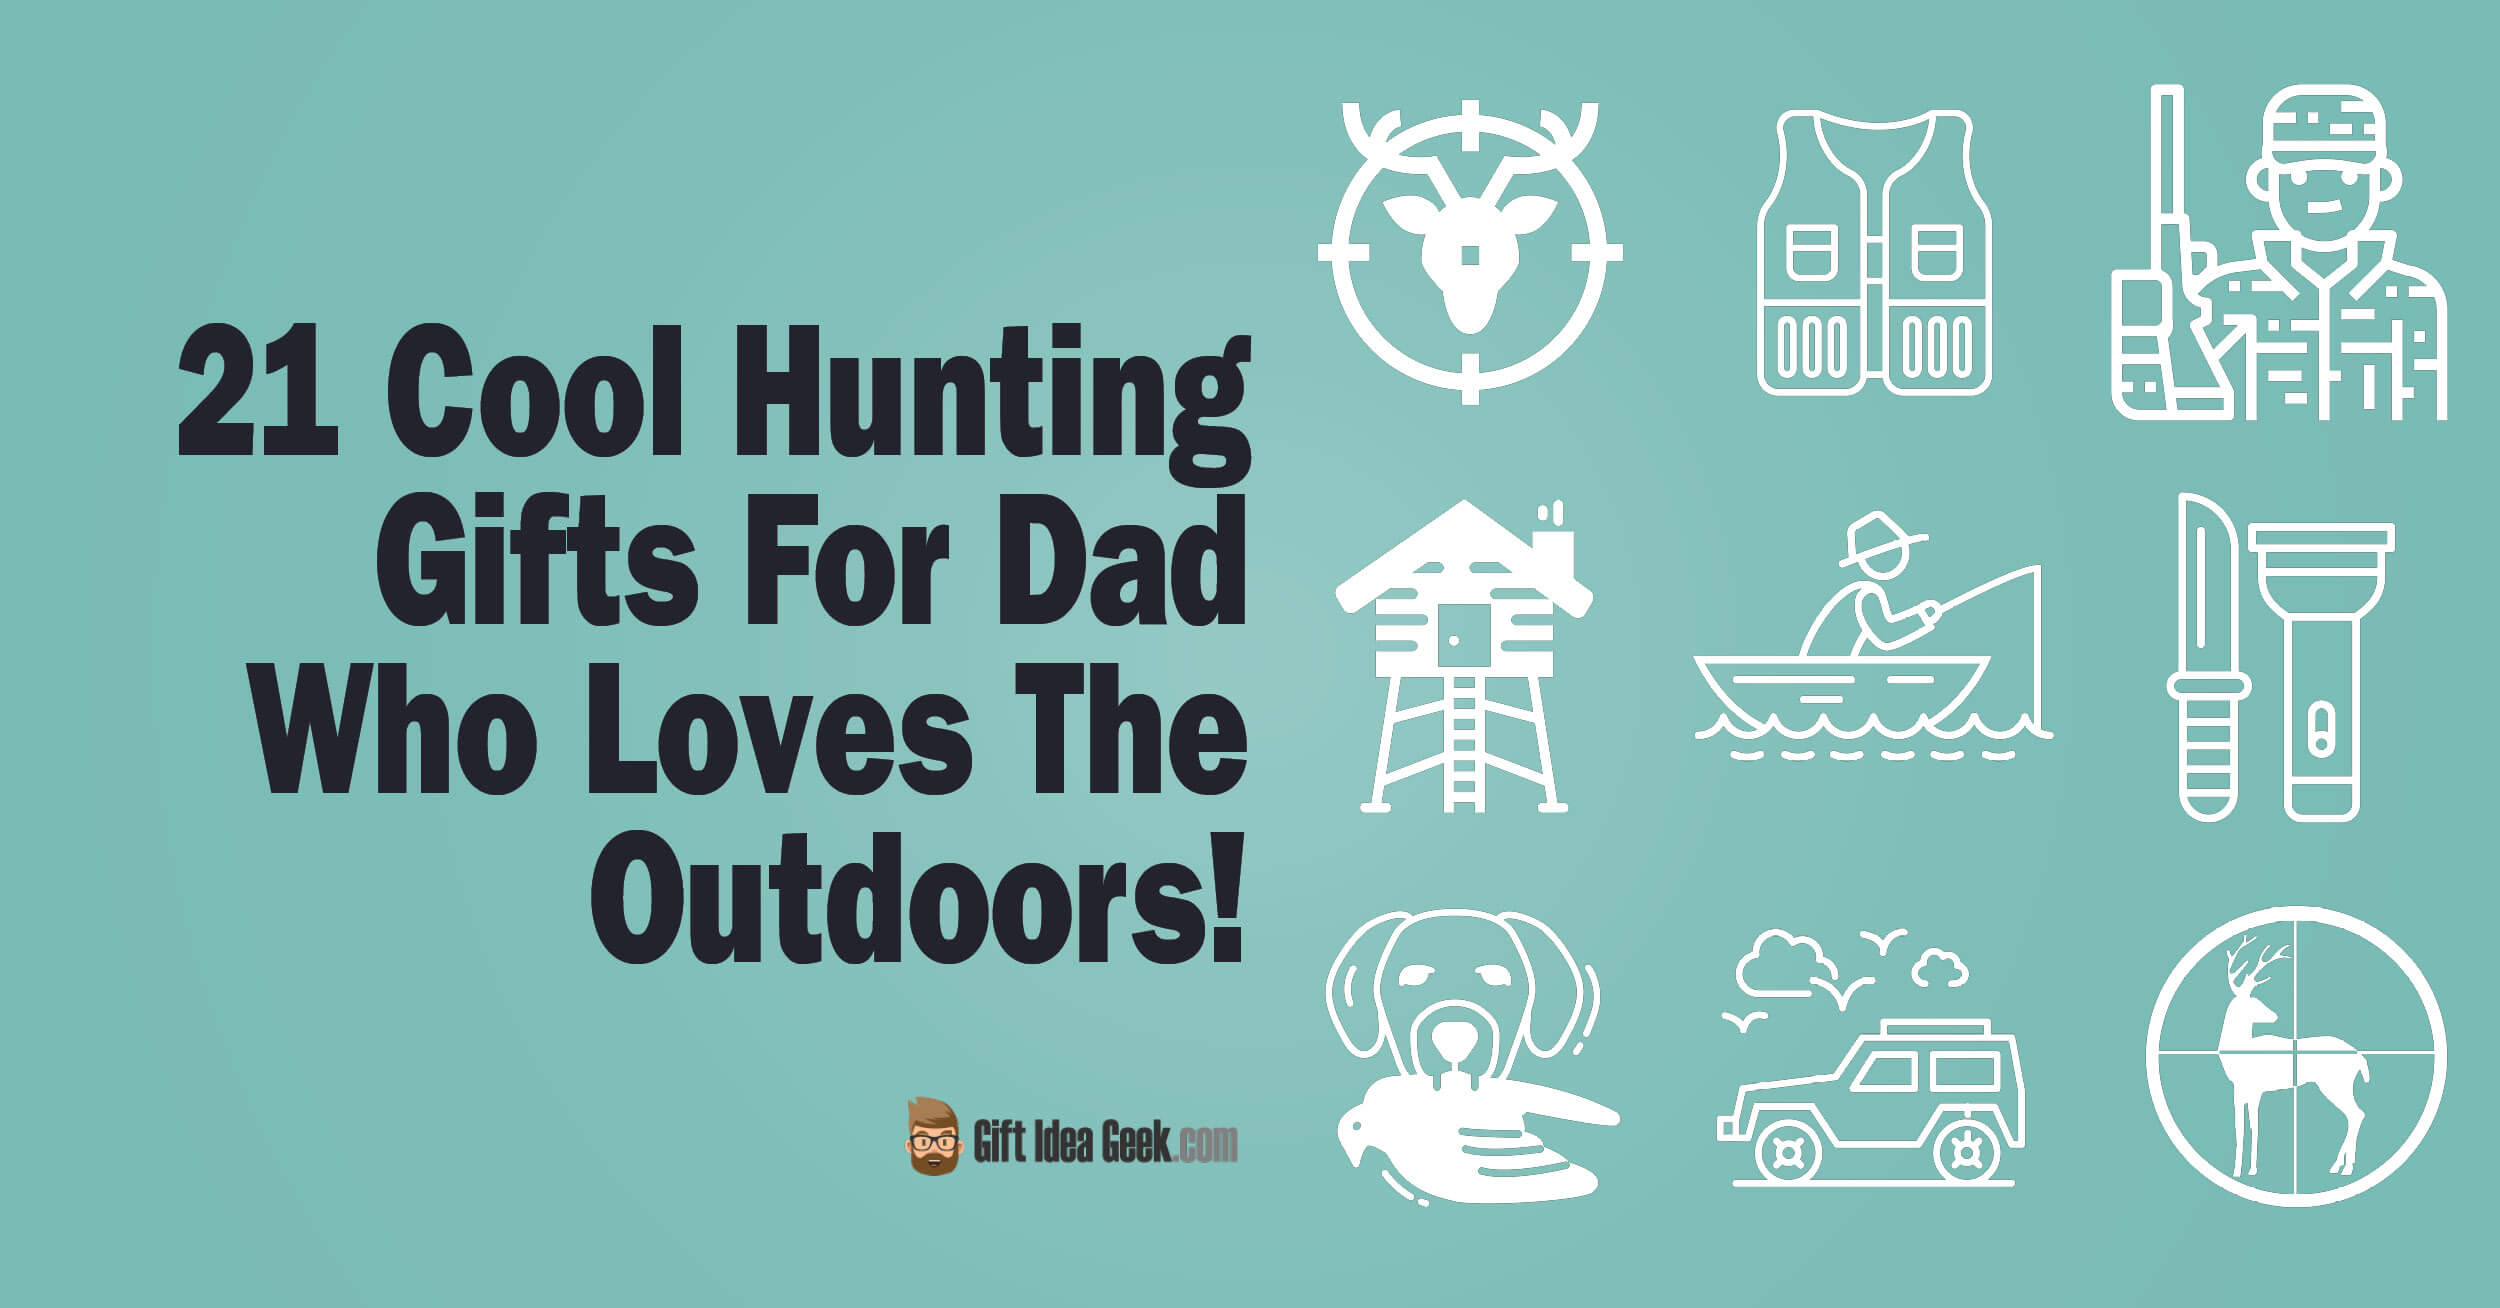 21 Cool Hunting Gifts For Dad Who Loves The Outdoors!